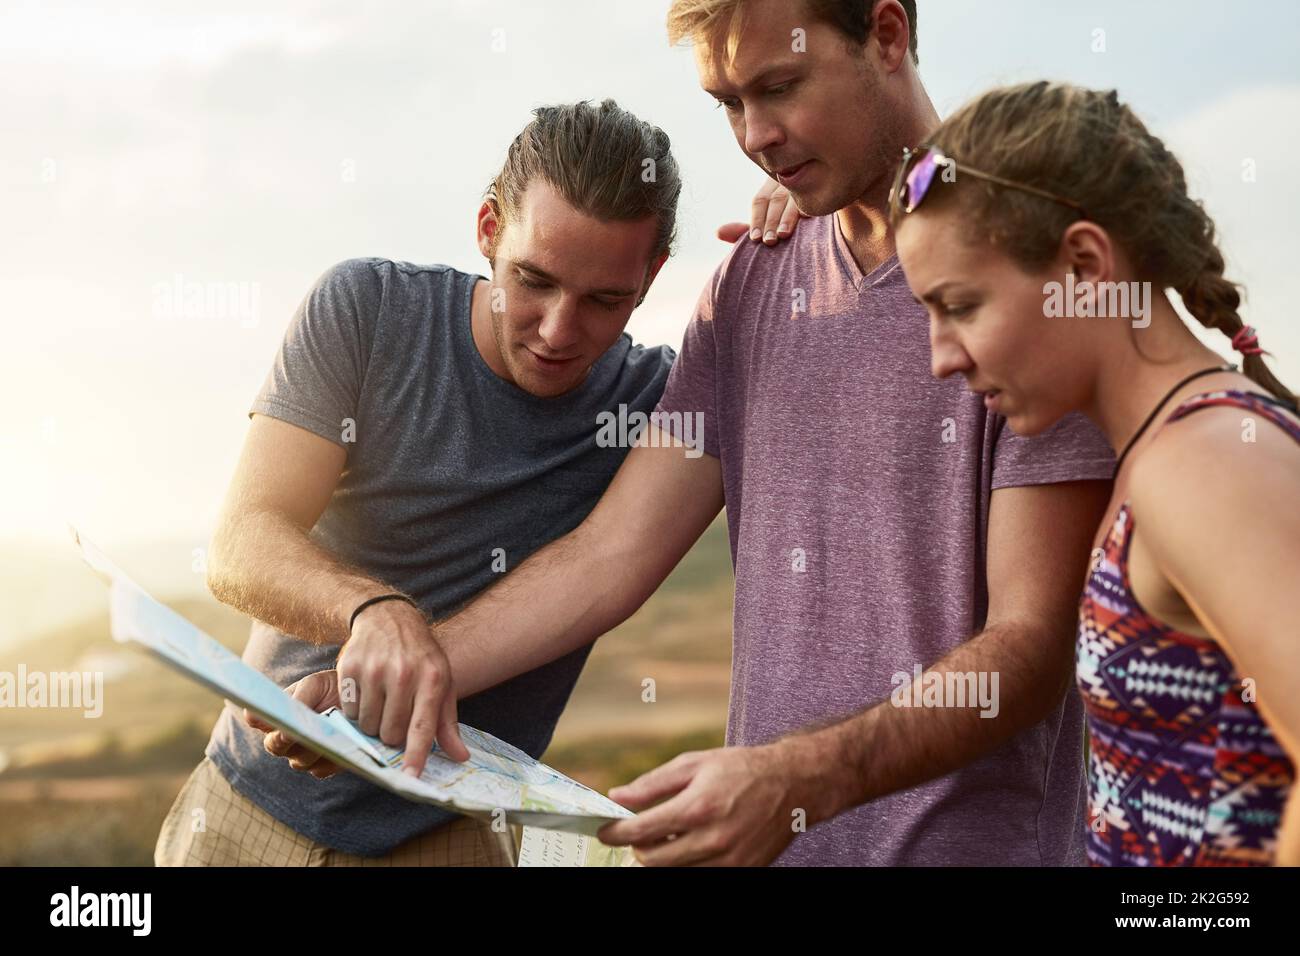 Where to wander next. Shot of three young hikers consulting a map while exploring a new trail. Stock Photo